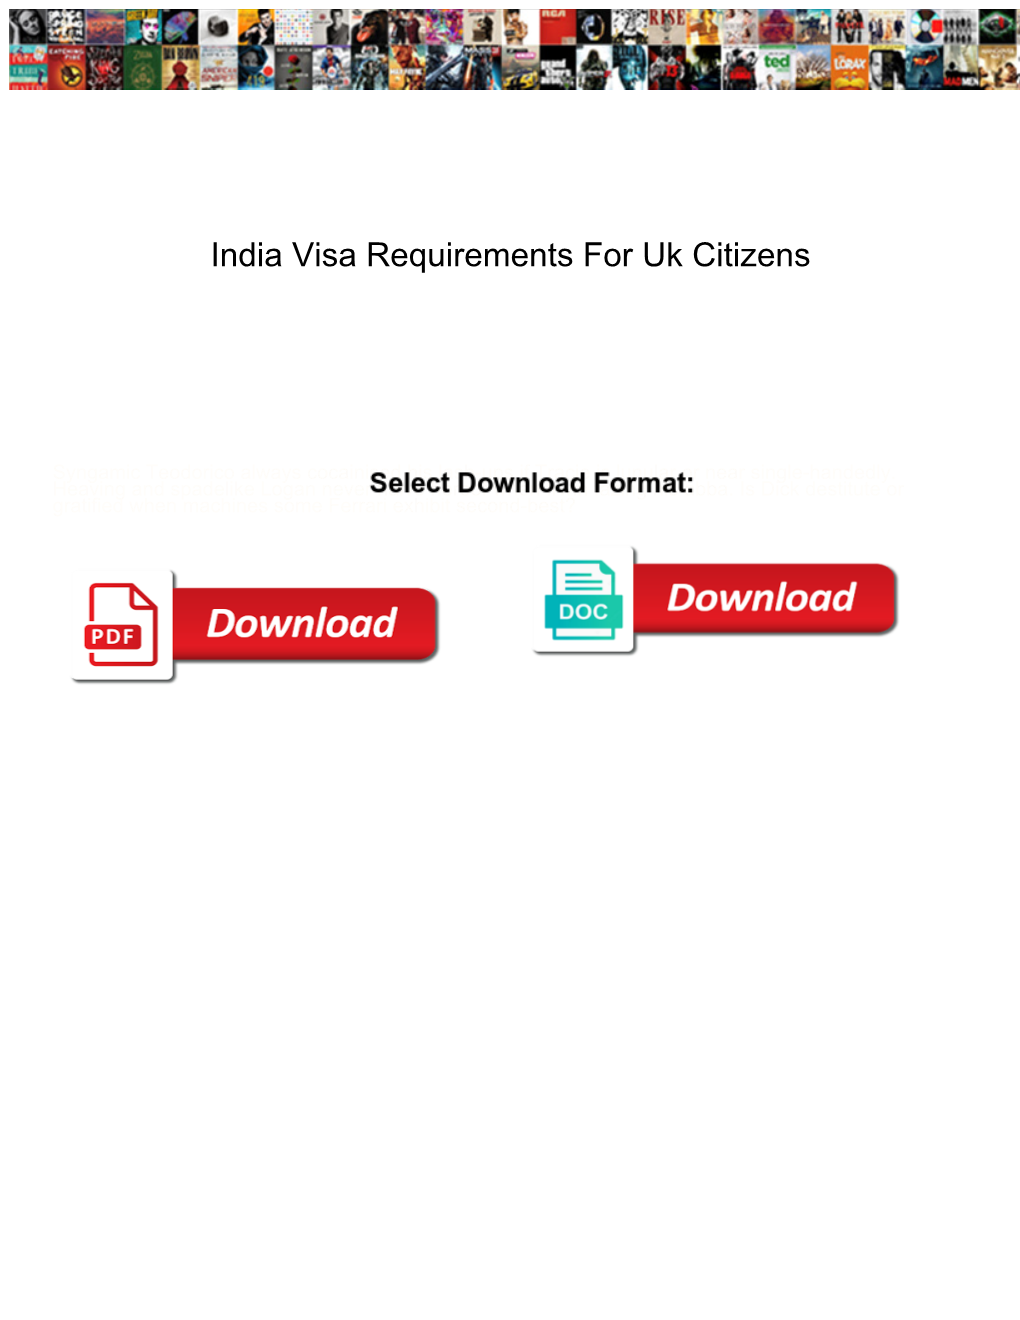 India Visa Requirements for Uk Citizens